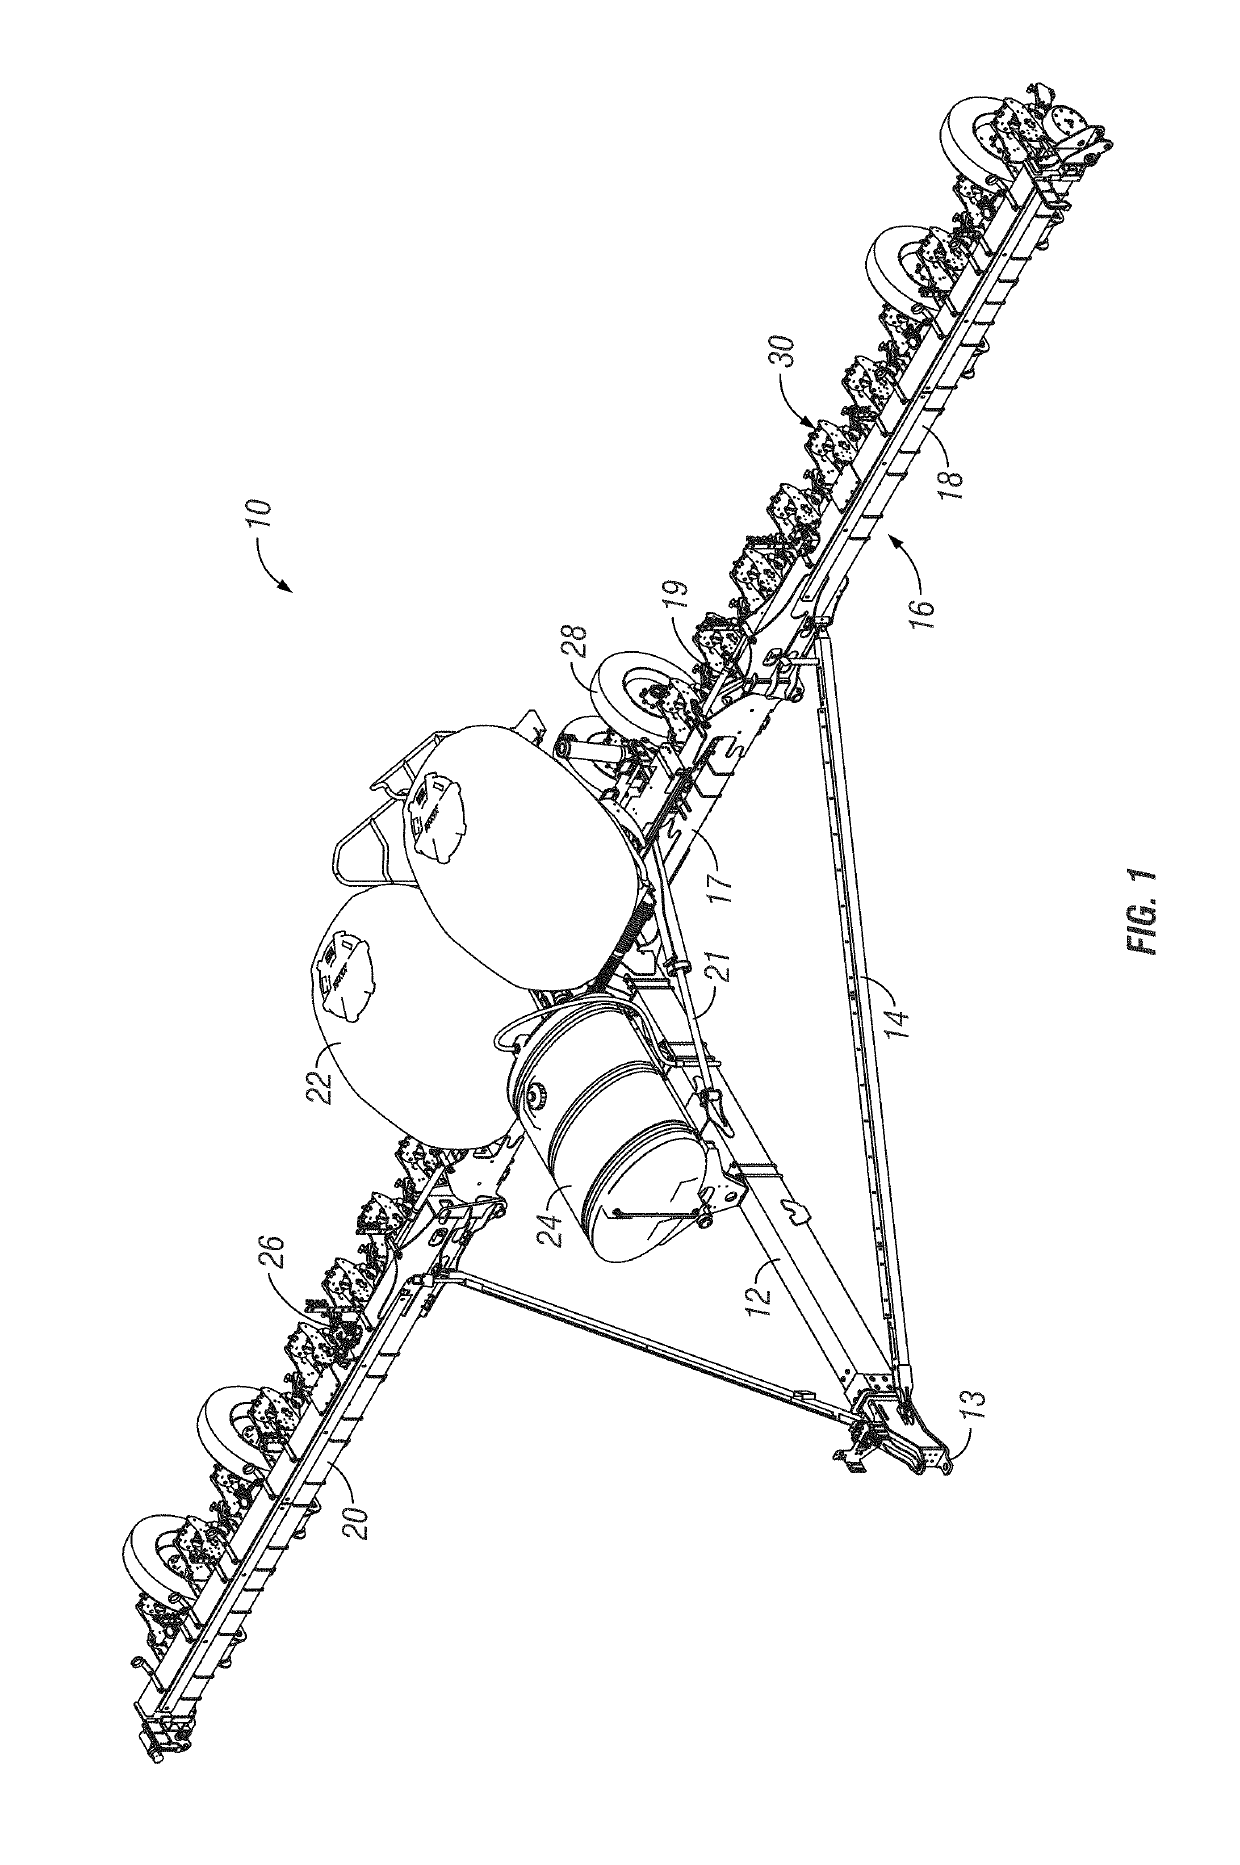 Systems, methods, and apparatus for controlling downforce of an agricultural implement